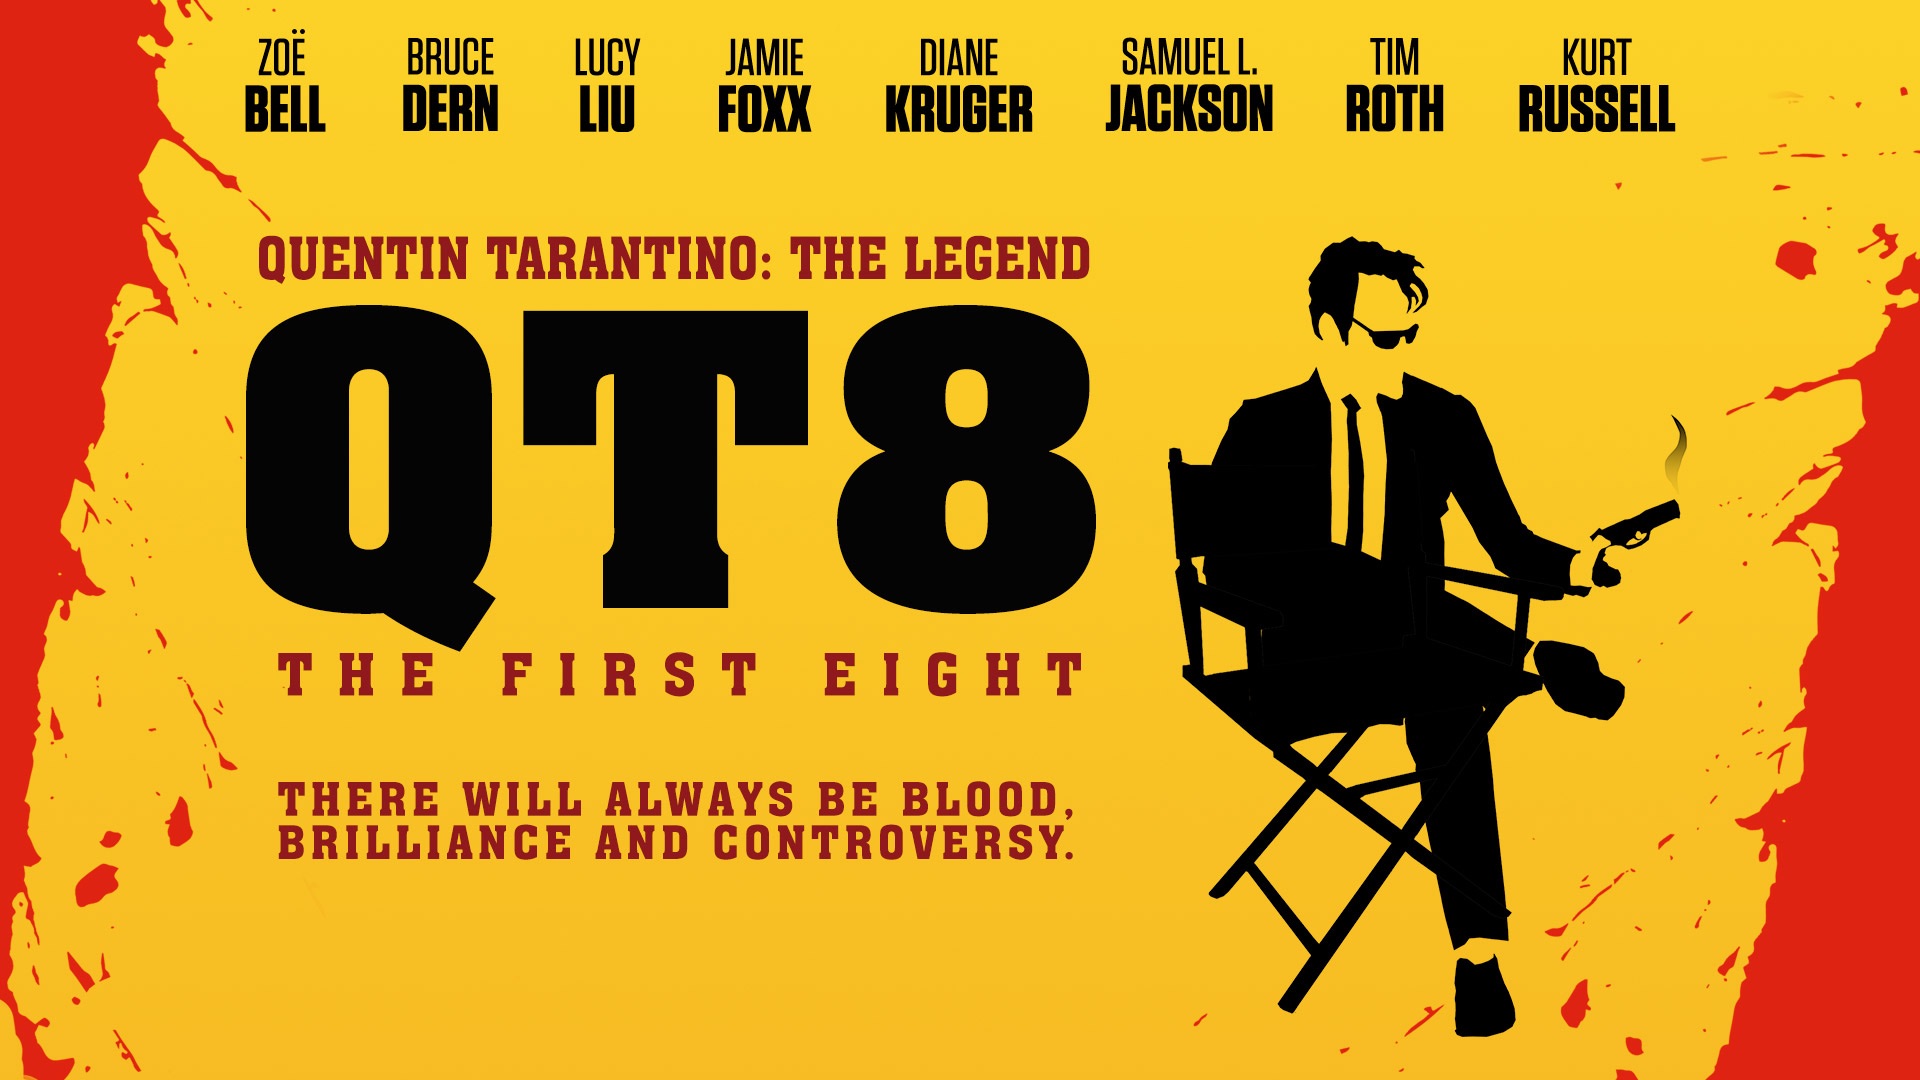 movie-qt8-the-first-eight-hd-wallpaper-background-image